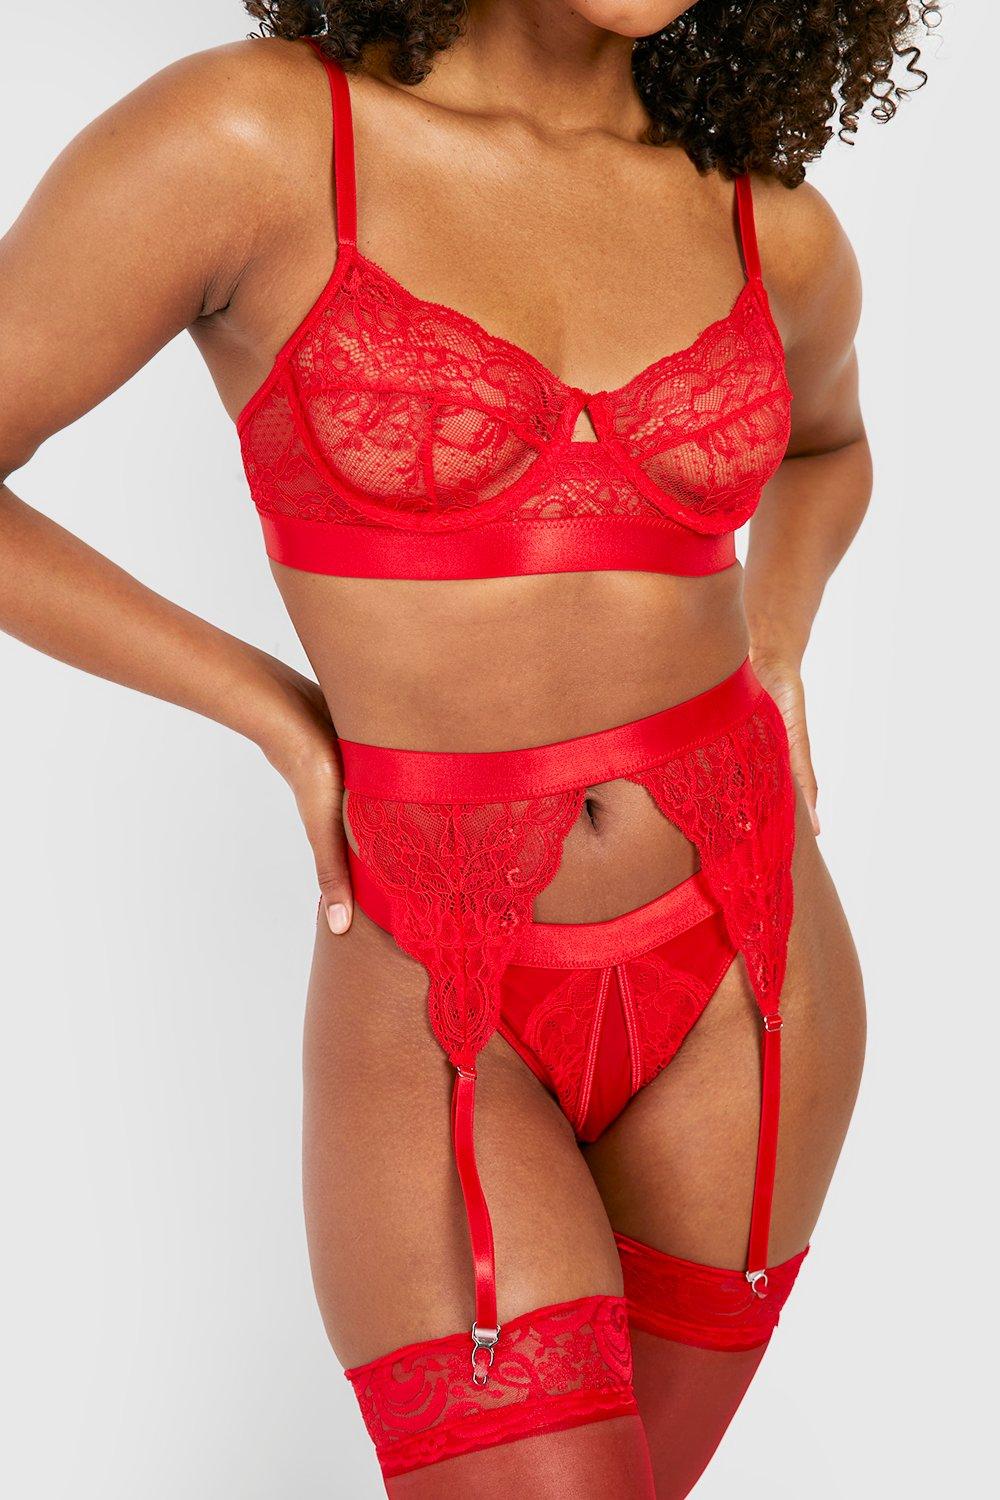 https://media.boohoo.com/i/boohoo/gzz47168_red_xl_3/female-red-crotchless-lace-bra-thong-and-suspender-set